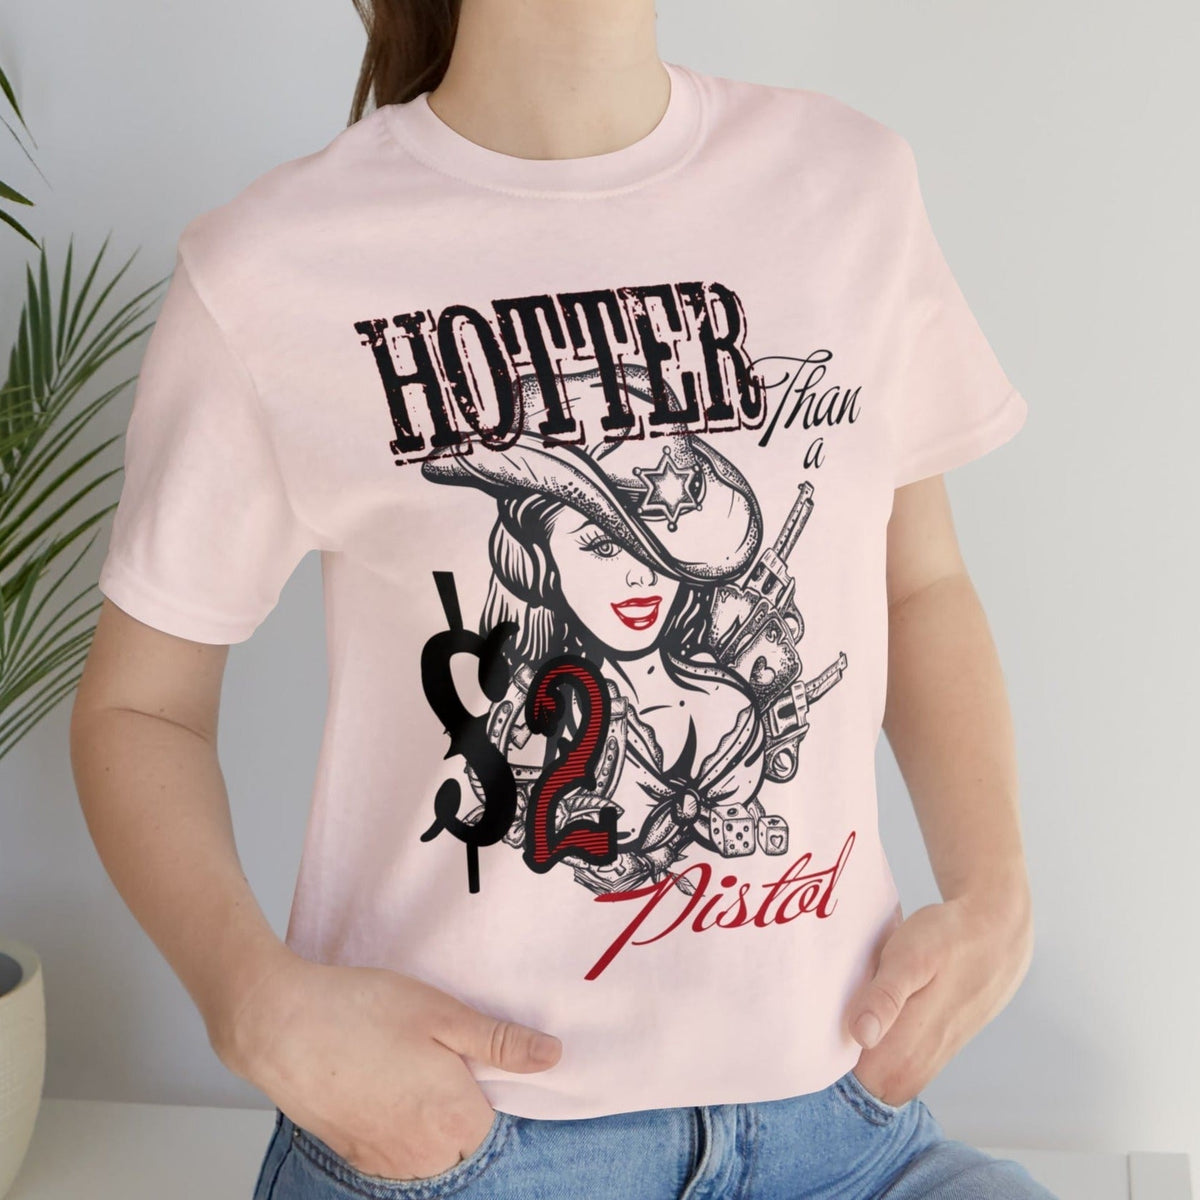 Hotter Than a $2 Pistol Tee | Country Graphic Tee | Cowgirl T-shirt T-Shirt TheFringeCultureCollective